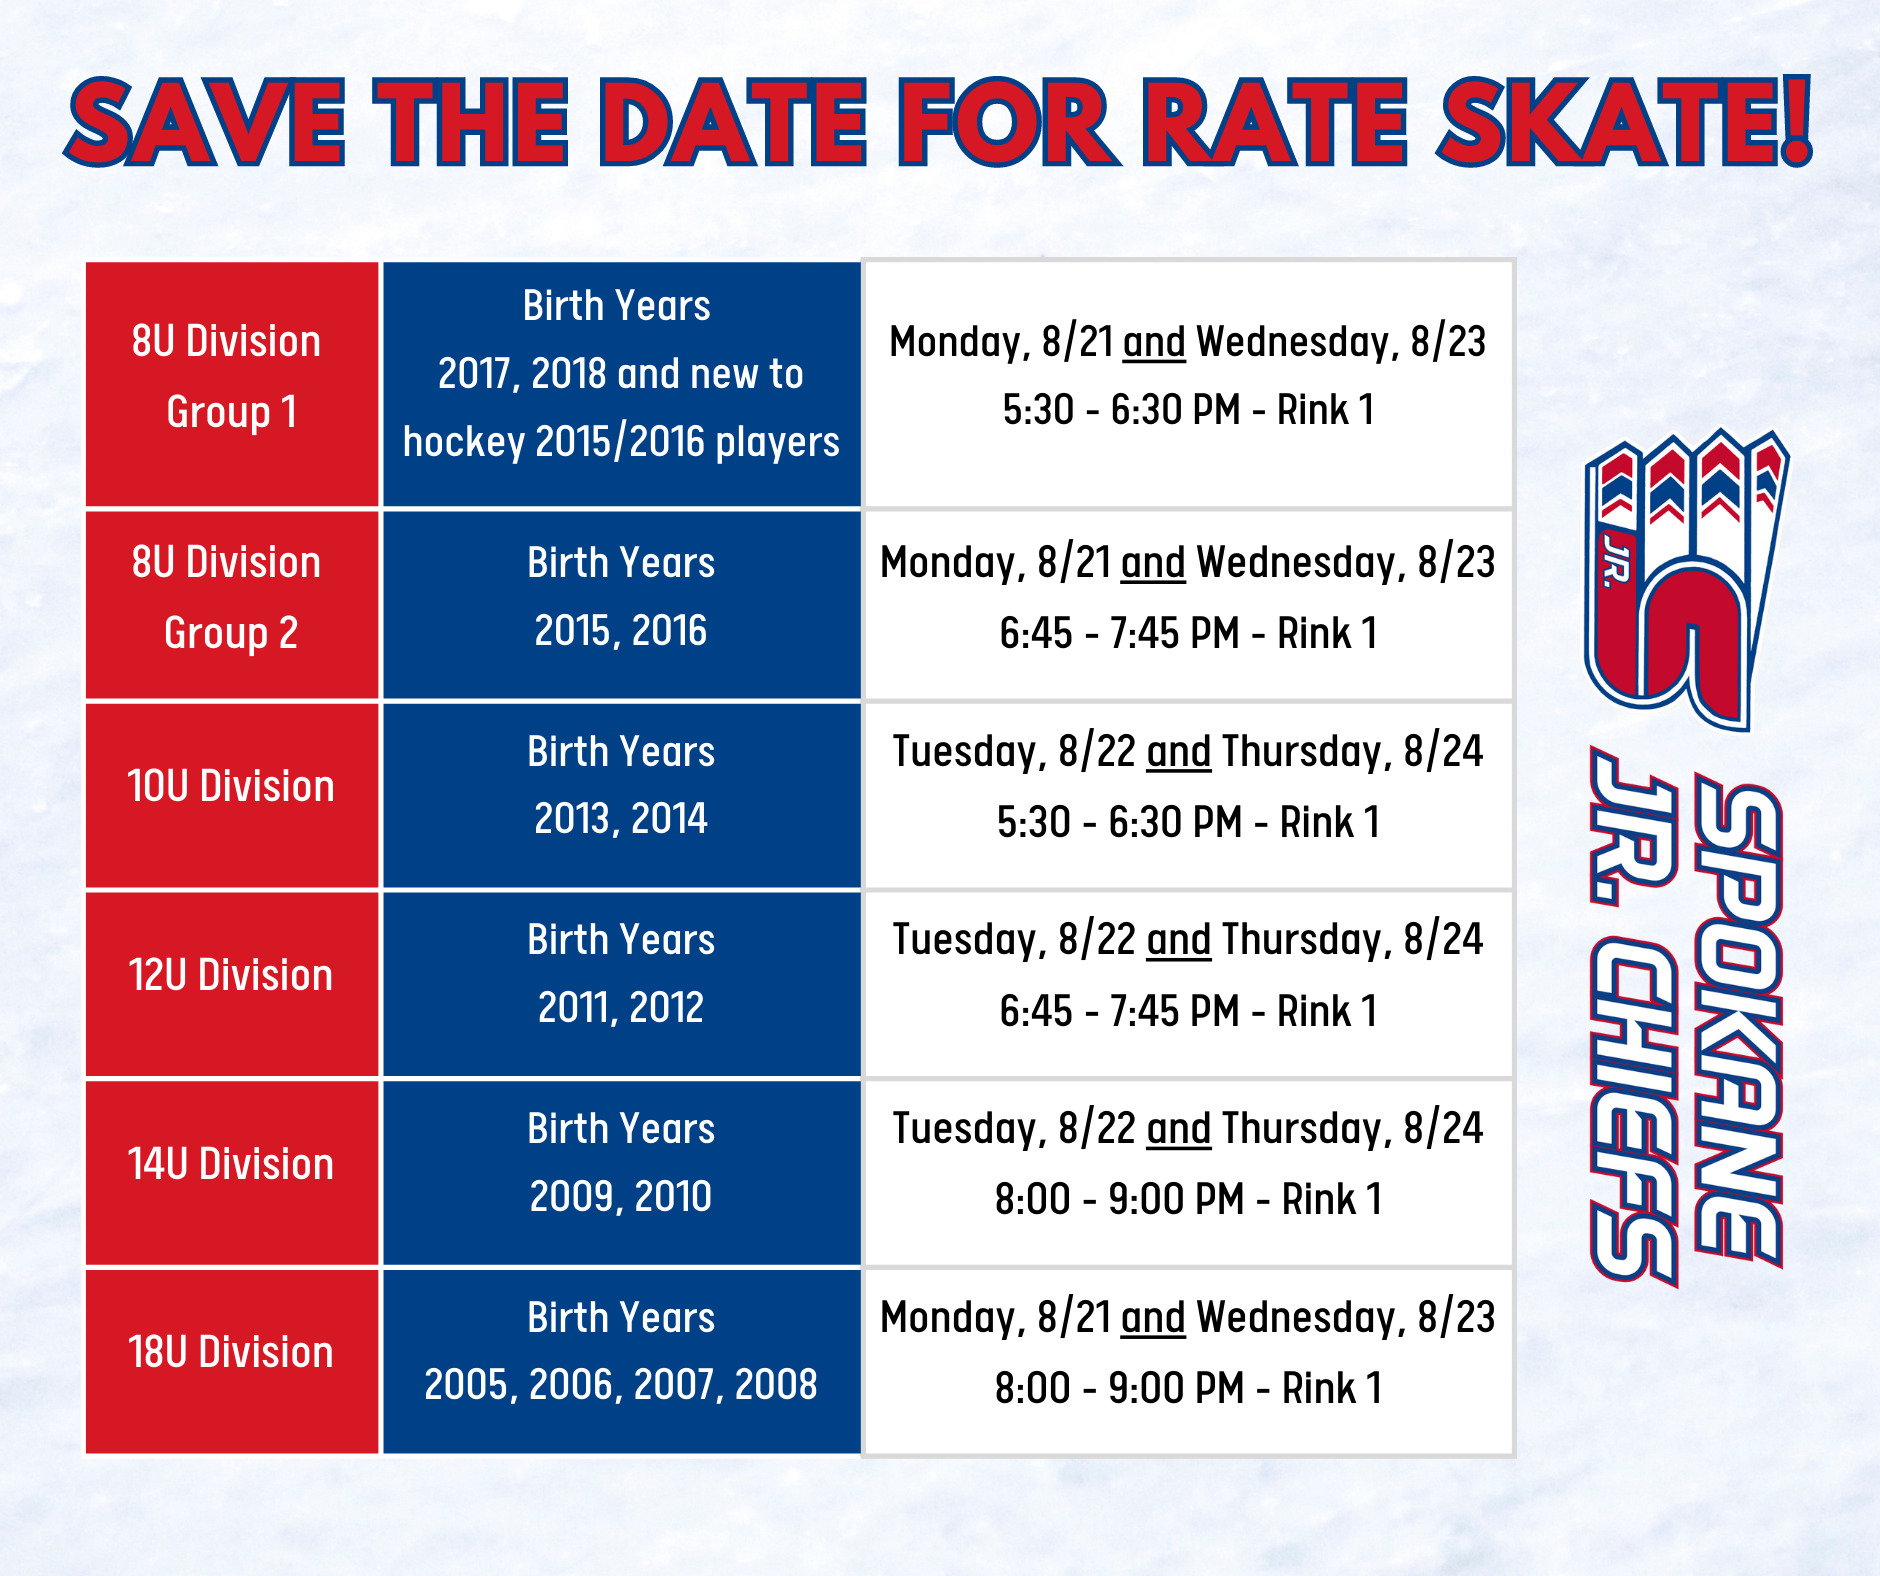 Rate Skate Days:Times